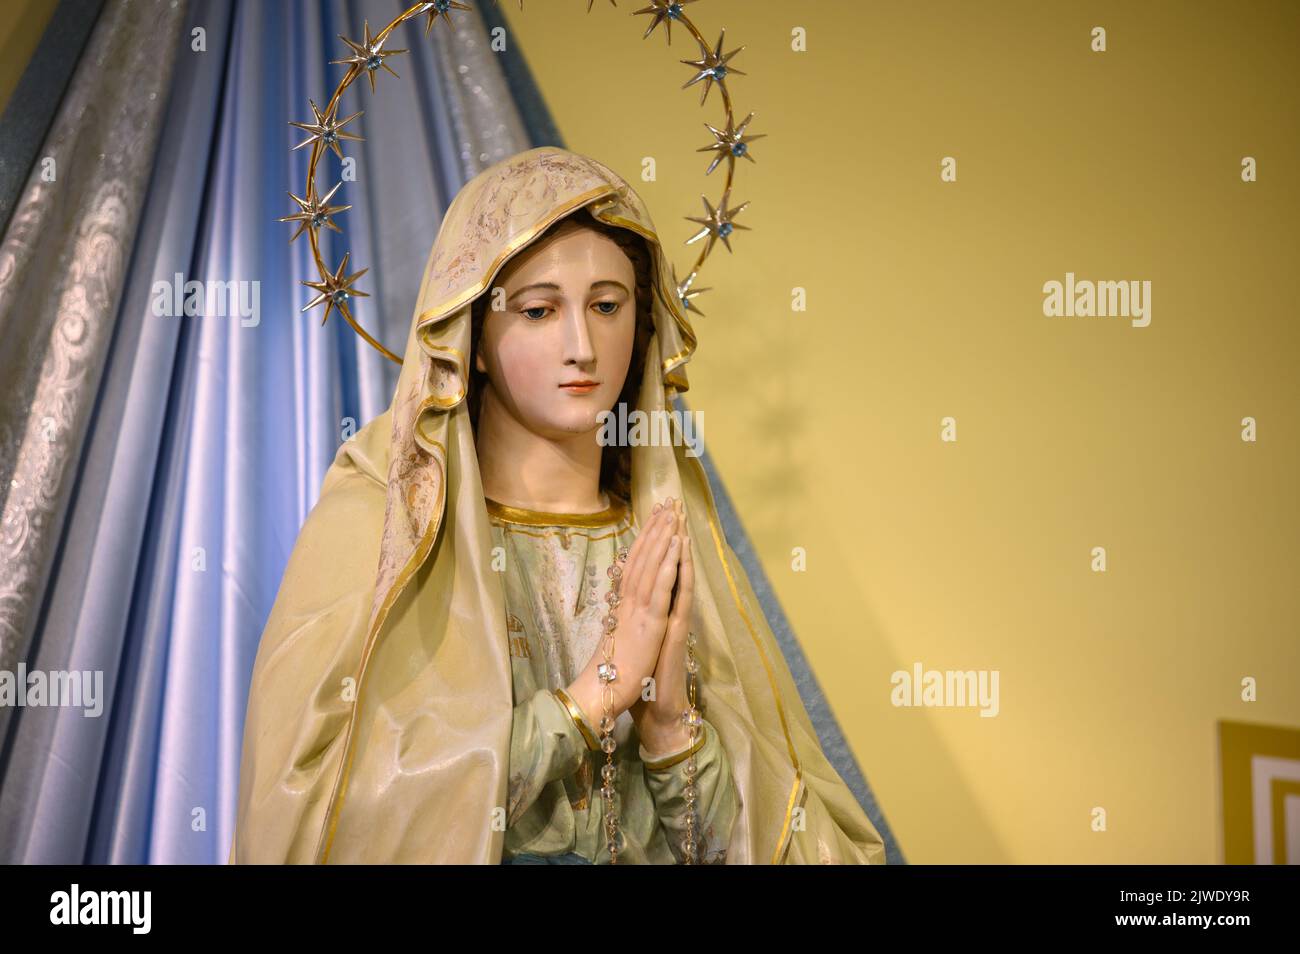 Statue of the Virgin Mary, the Queen of Peace, in the St James church in Medjugorje, Bosnia and Herzegovina. Stock Photo